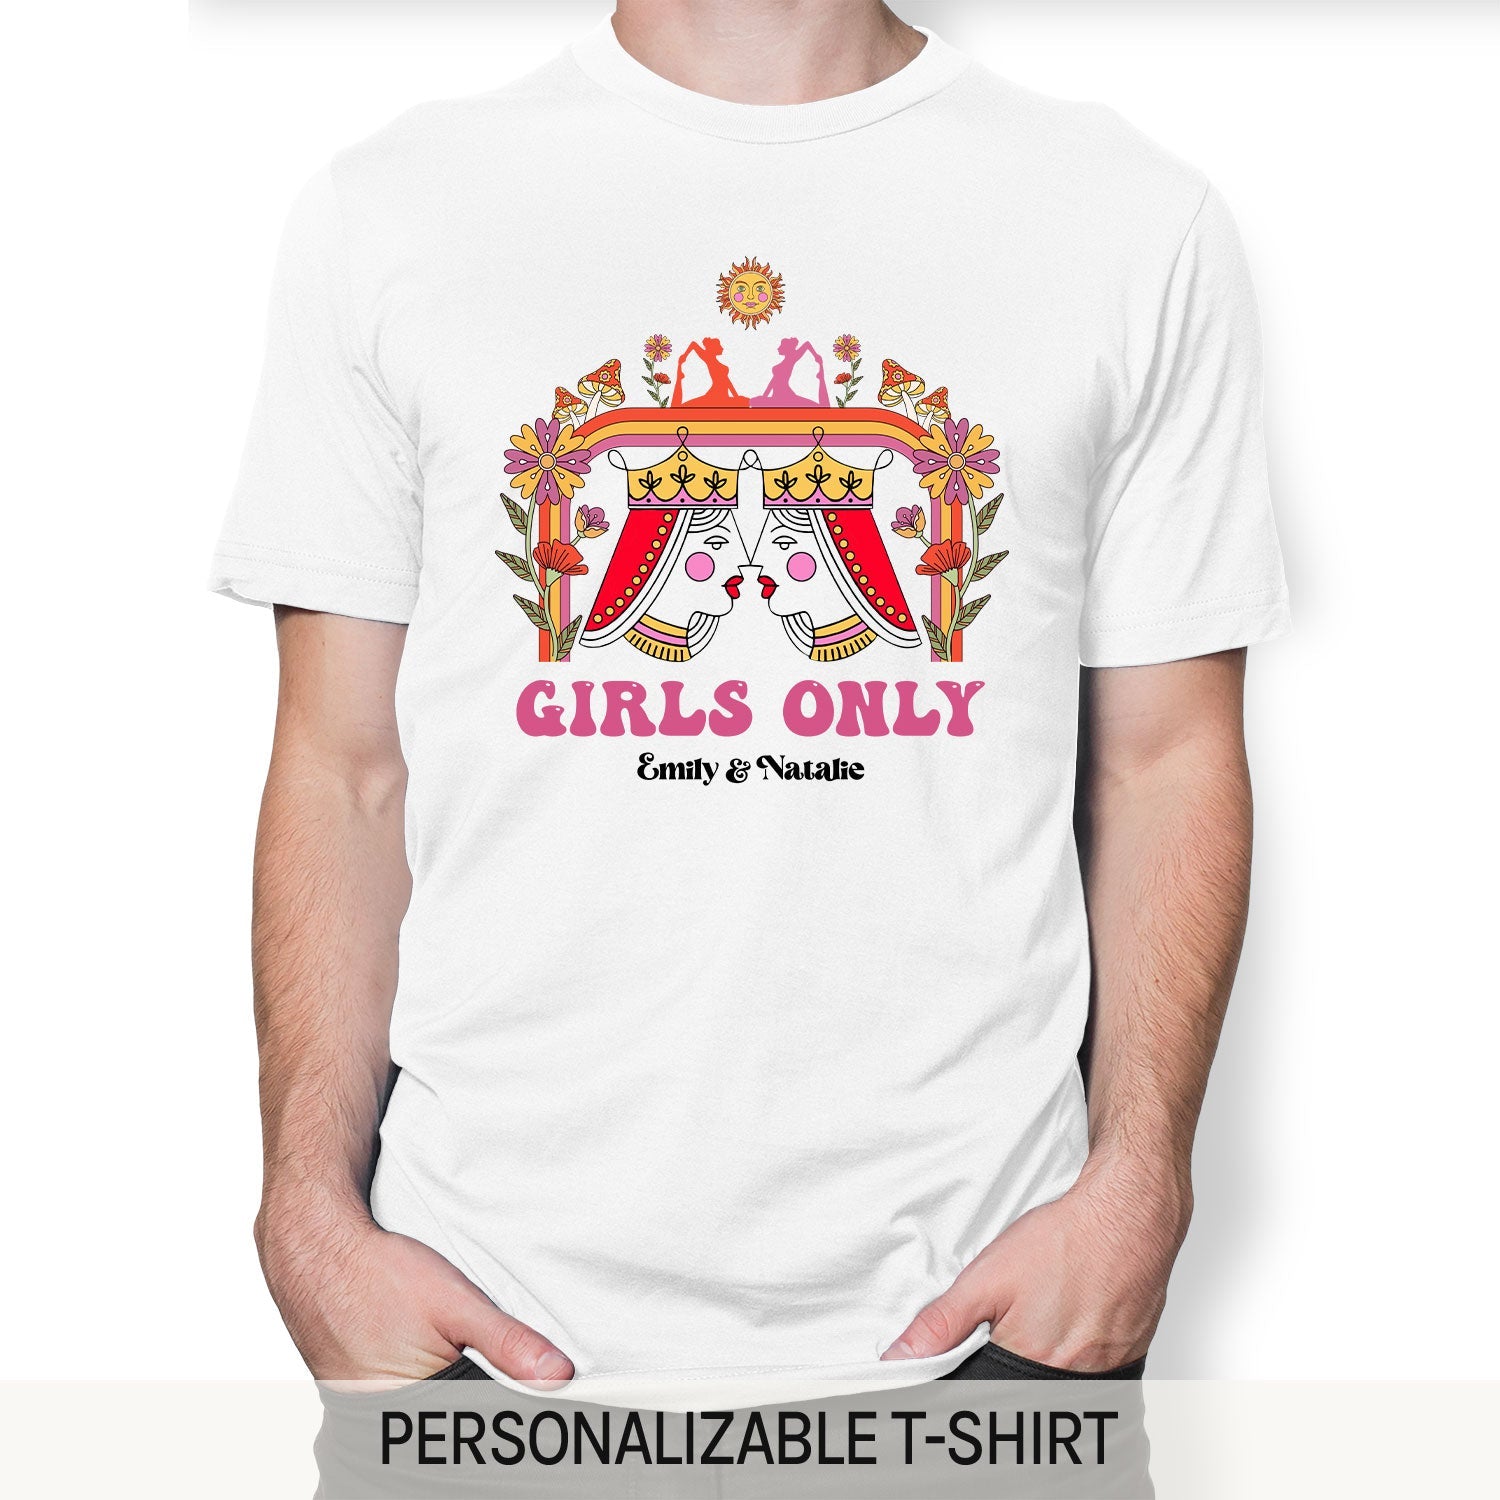 Girls Only - Personalized Anniversary or Valentine's Day gift for Lesbian Couple - Custom Tshirt - MyMindfulGifts